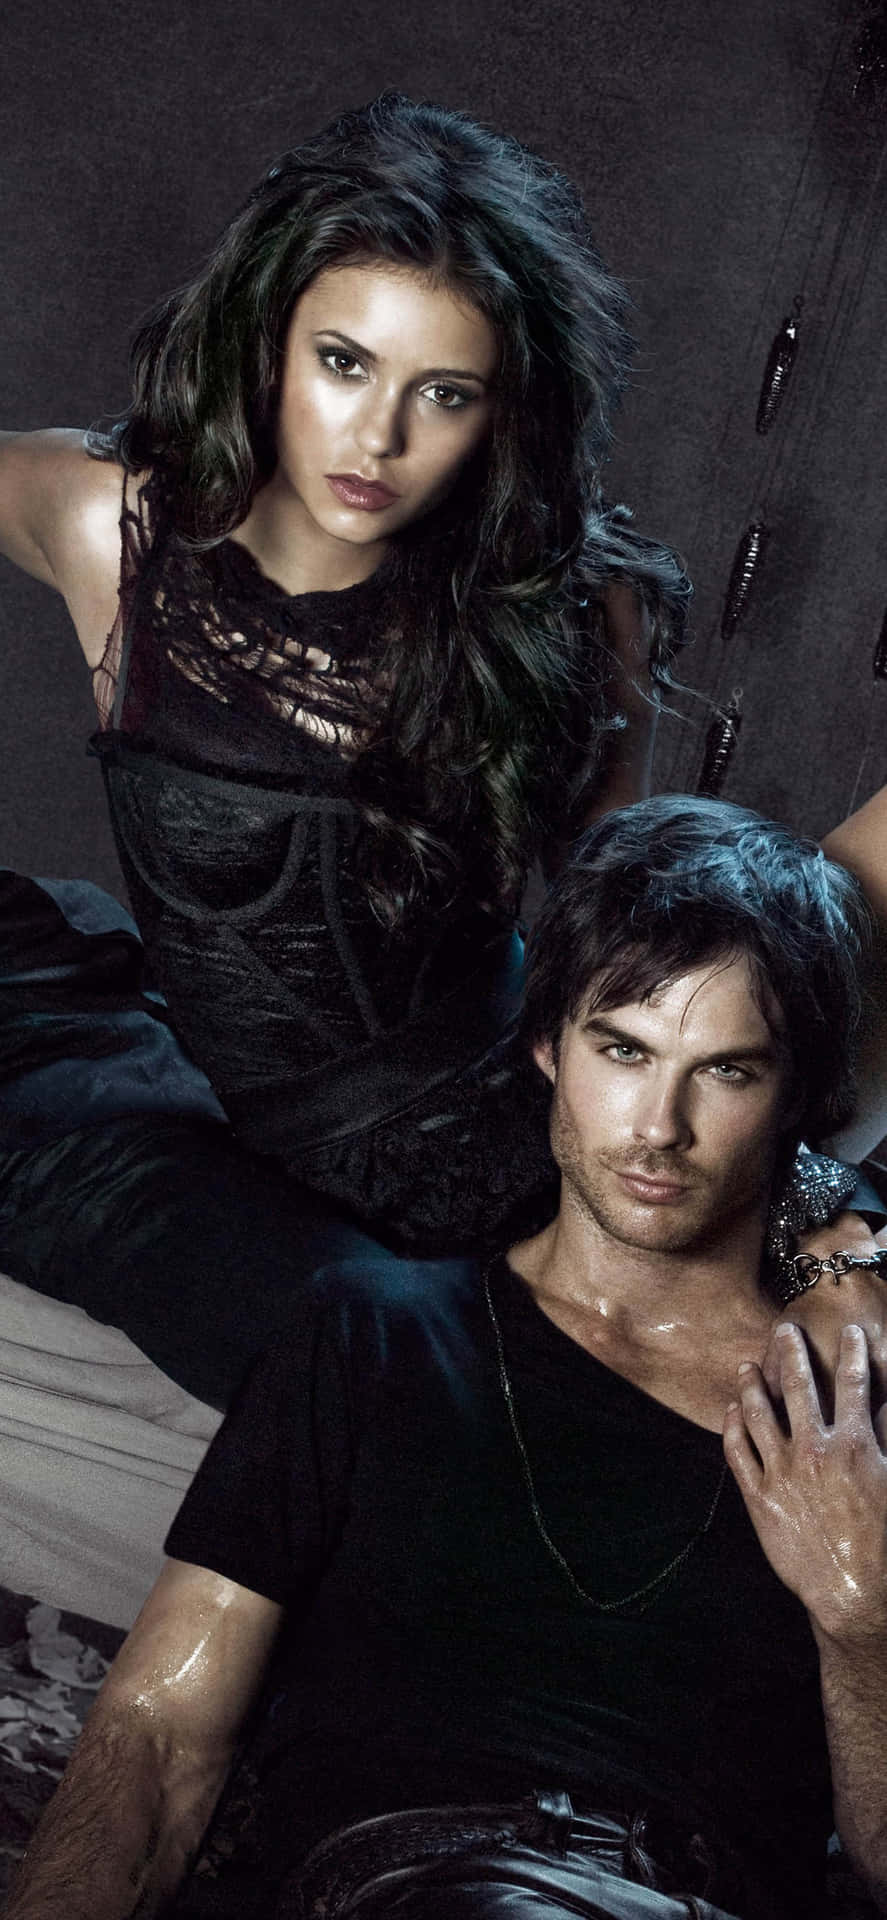 Immerse yourself in the world of Mystic Falls with Vampire Diaries Desktop Wallpaper